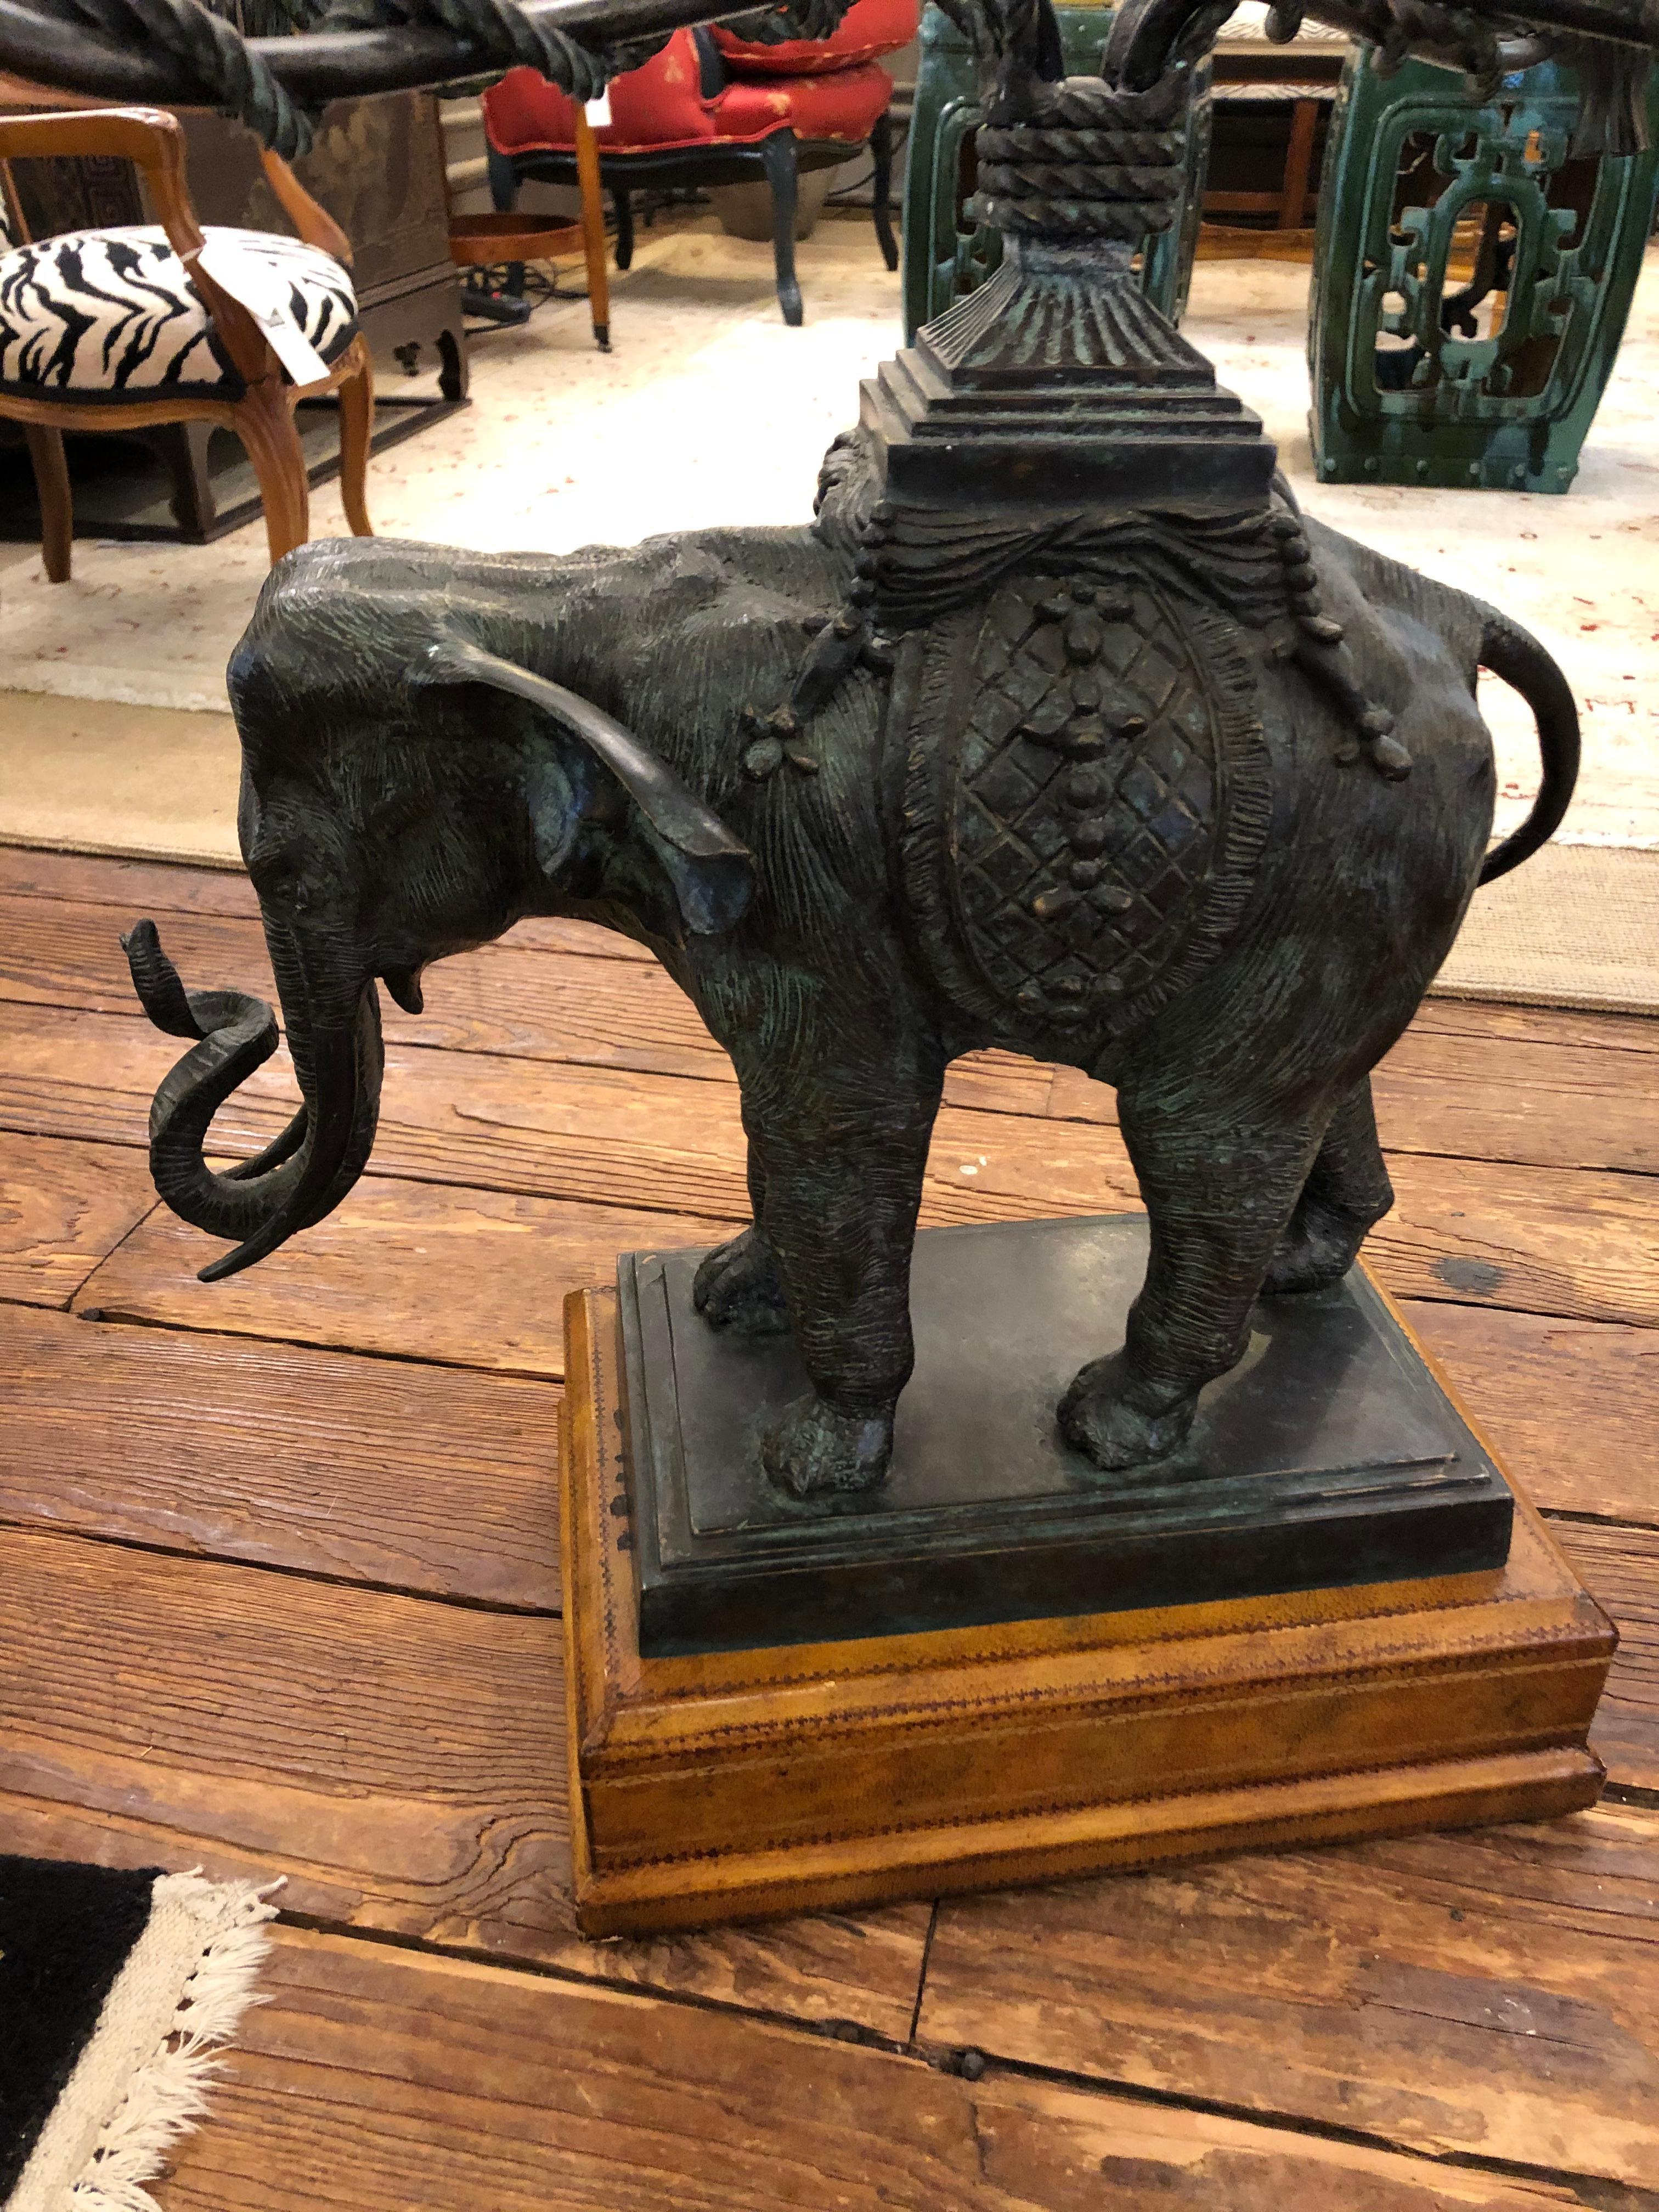 Super stylish almost square side table having sculptural patinated bronze elephant, brown tooled leather clad base and beveled glass top.